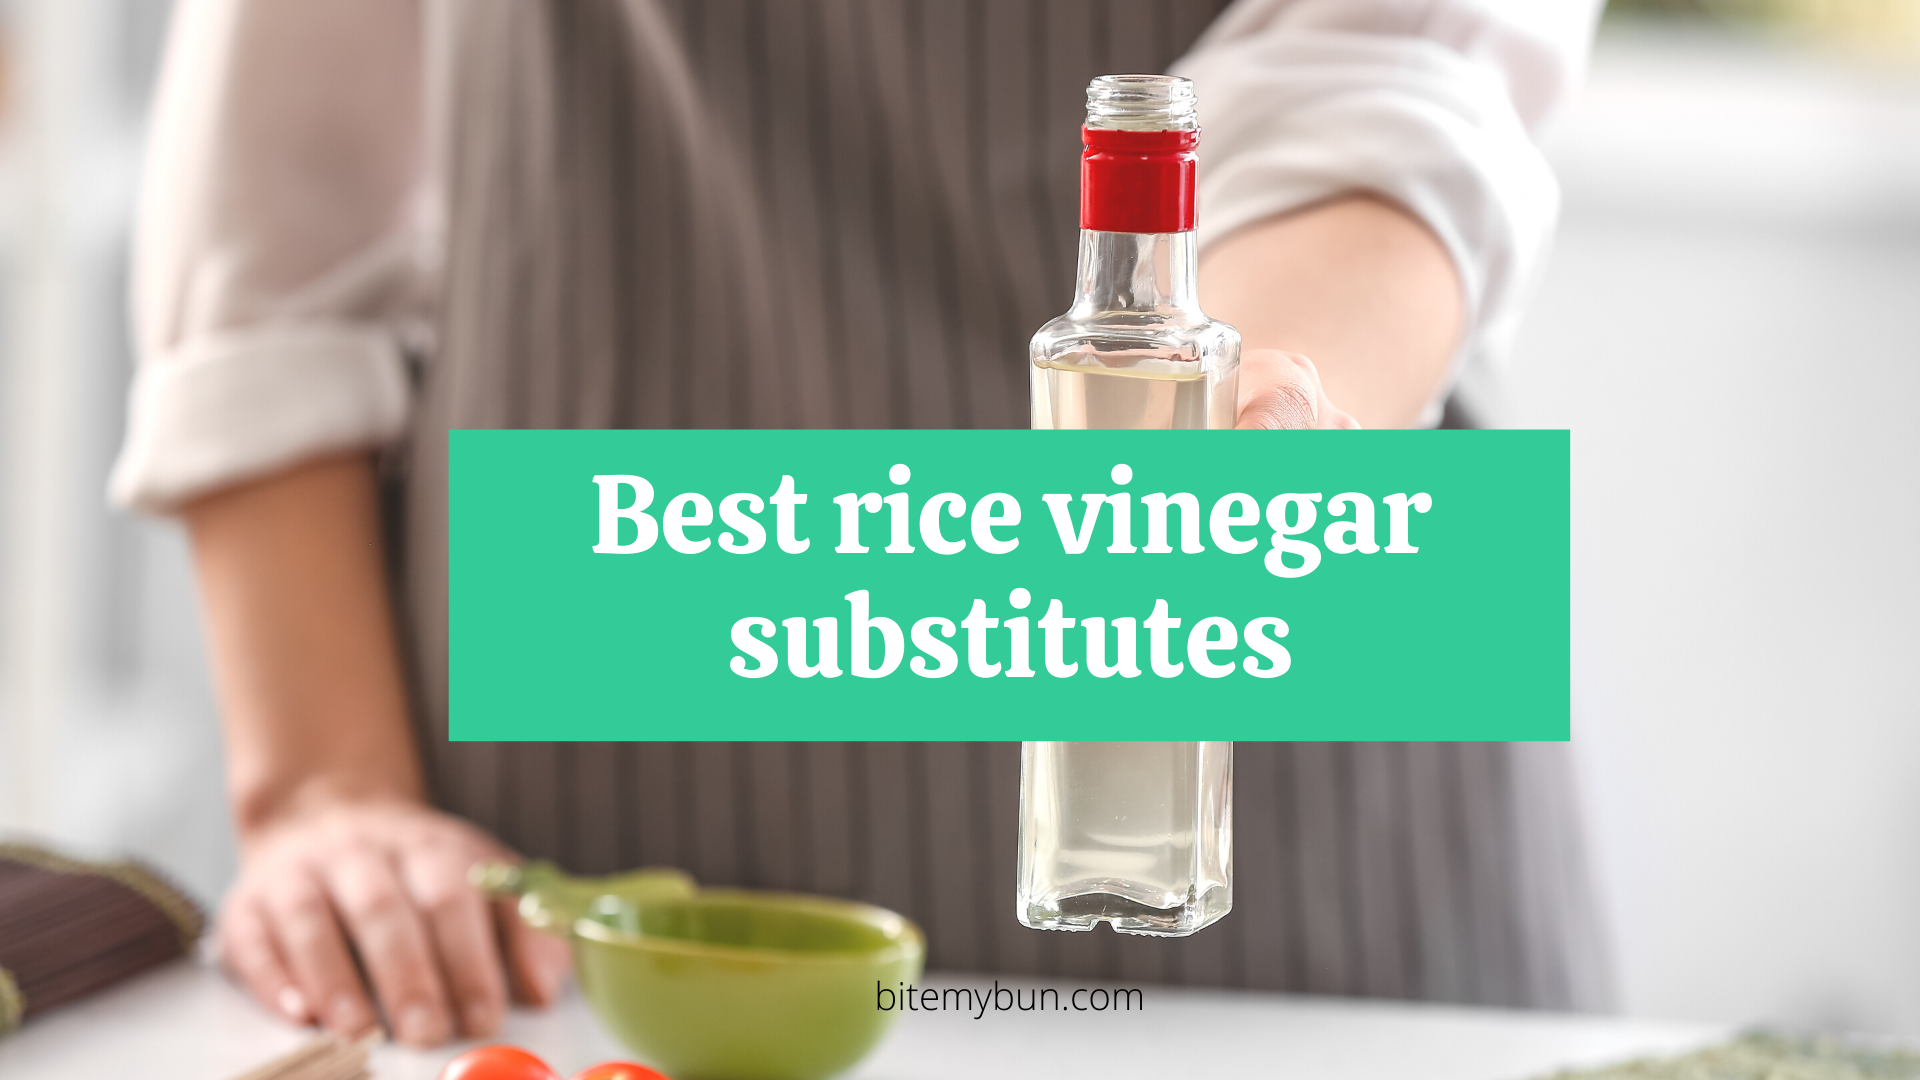 Best rice vinegar substitutes | It's easy, use these common pantry items